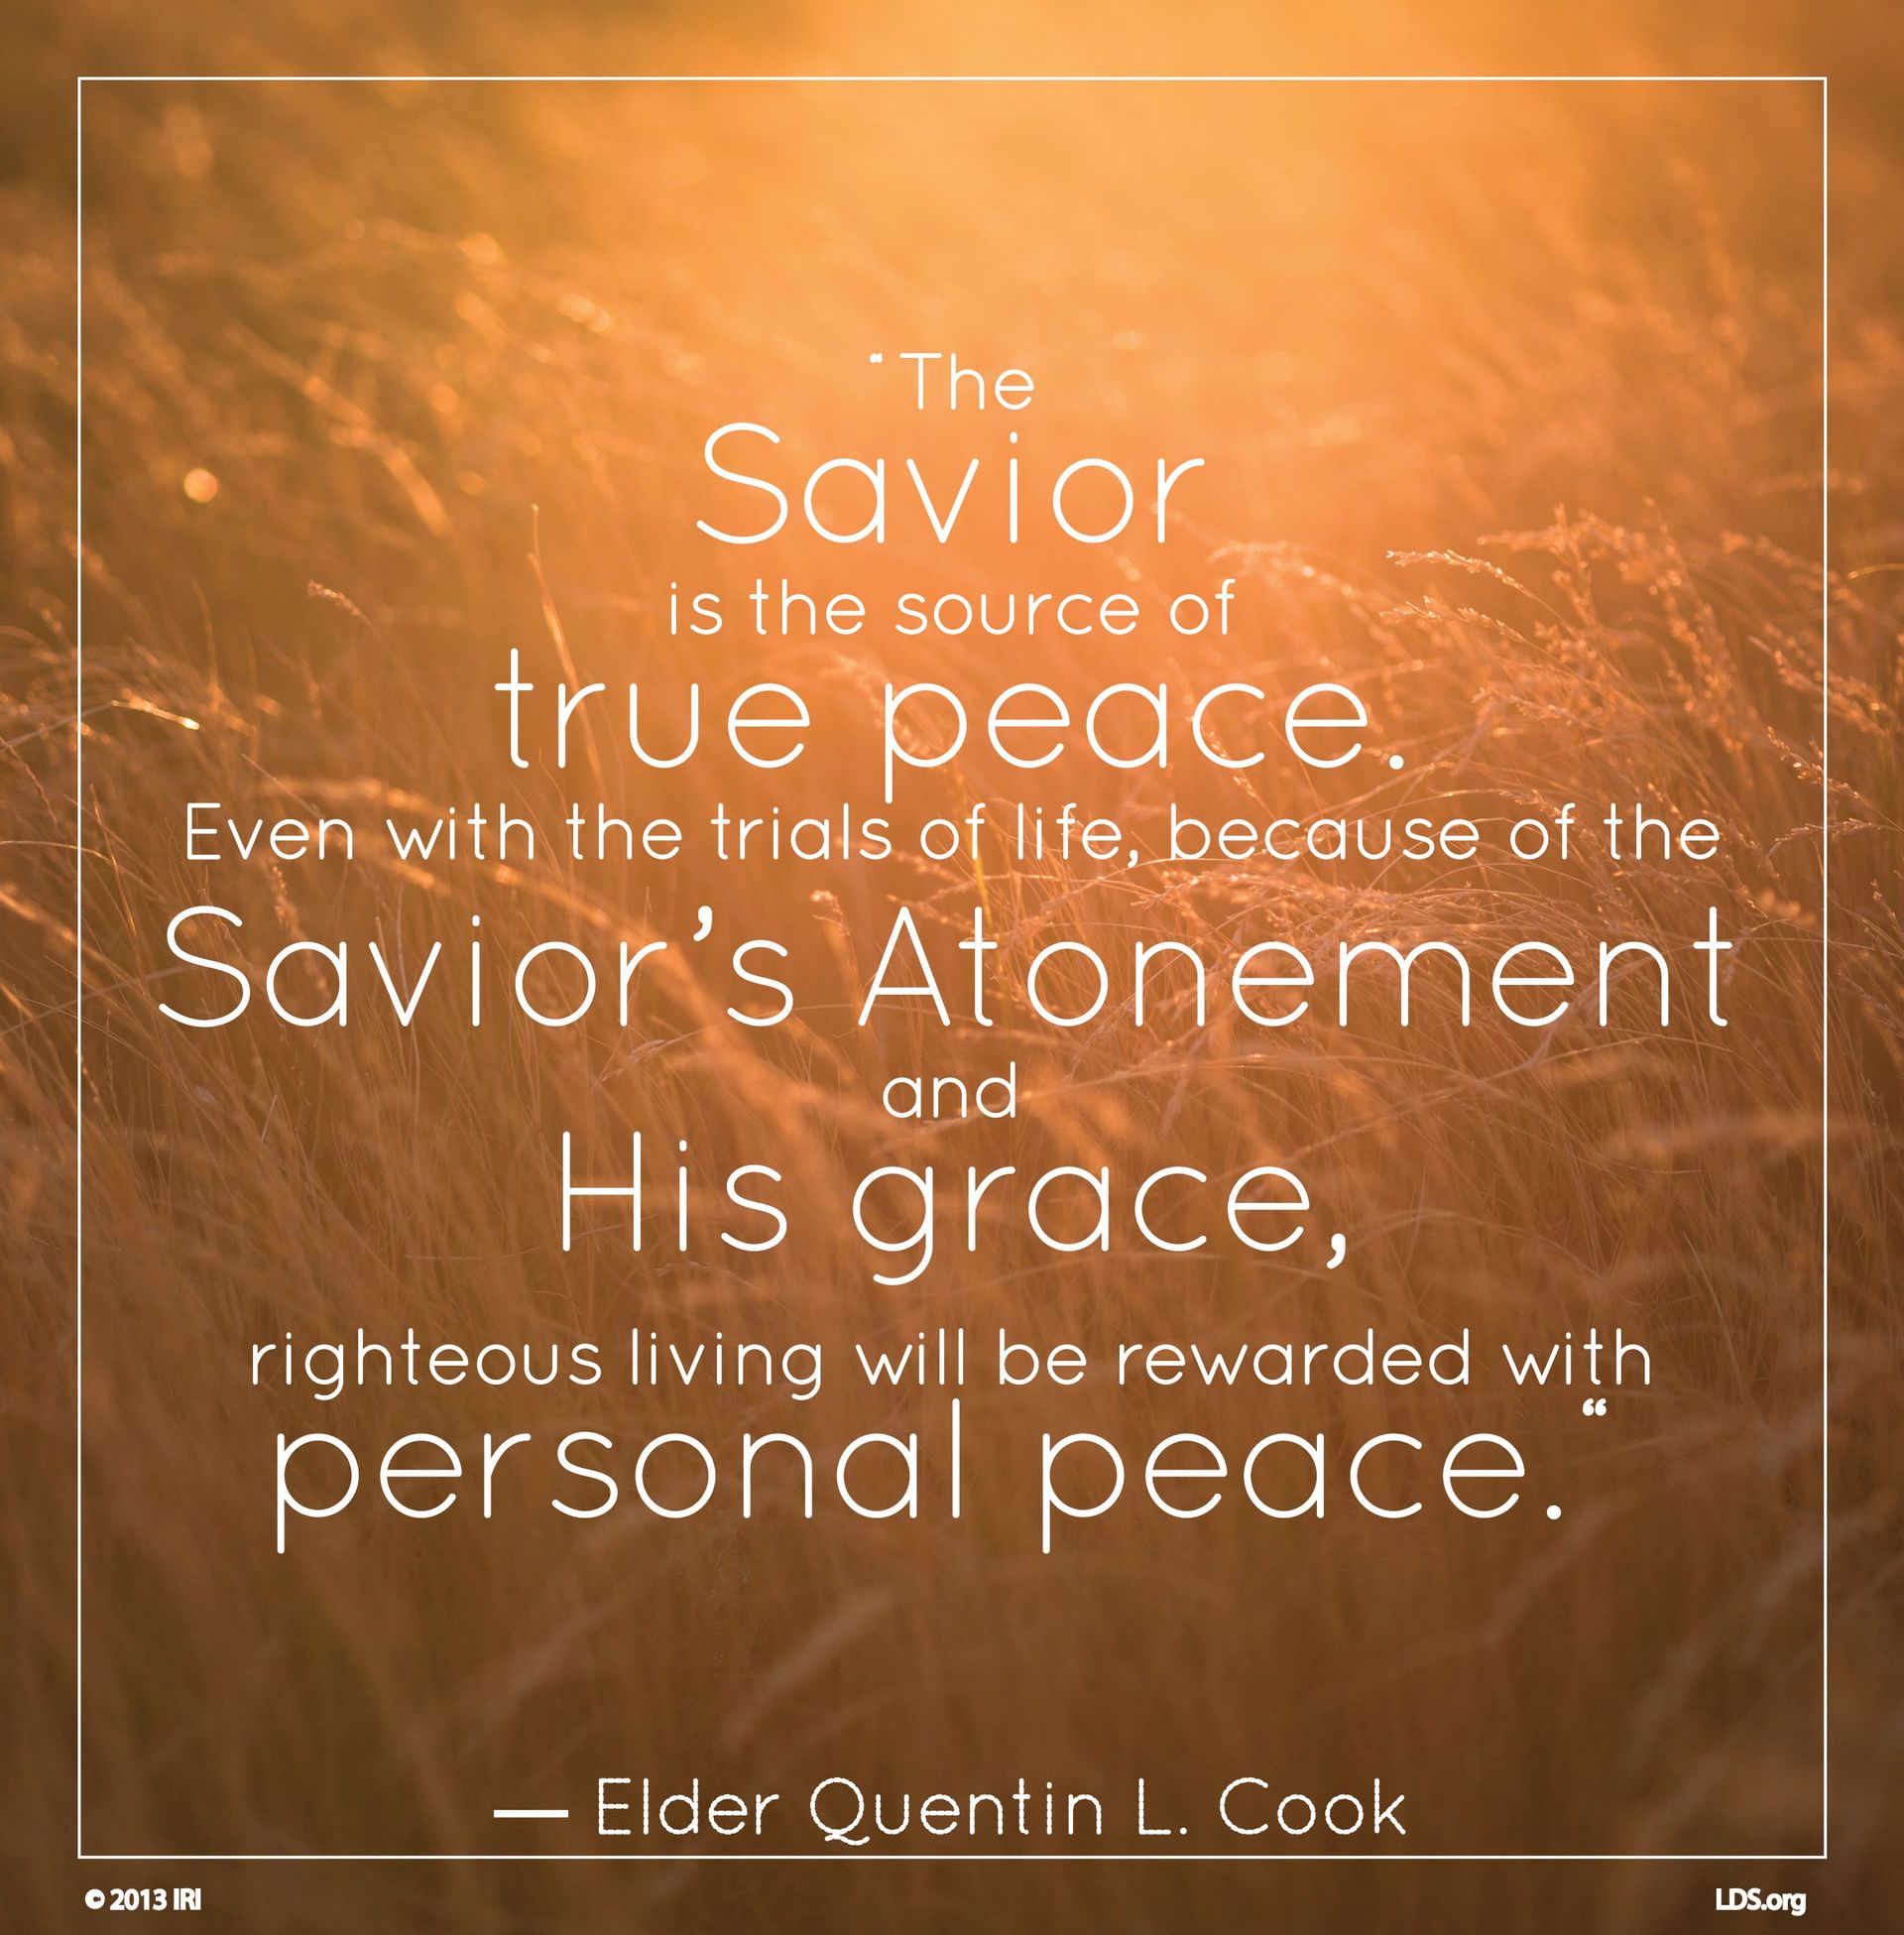 “The Savior is the source of true peace. Even with the trials of life, because of the Savior’s Atonement and His grace, righteous living will be rewarded with personal peace.”—Elder Quentin L. Cook, “Personal Peace: The Reward of Righteousness” © undefined ipCode 1.